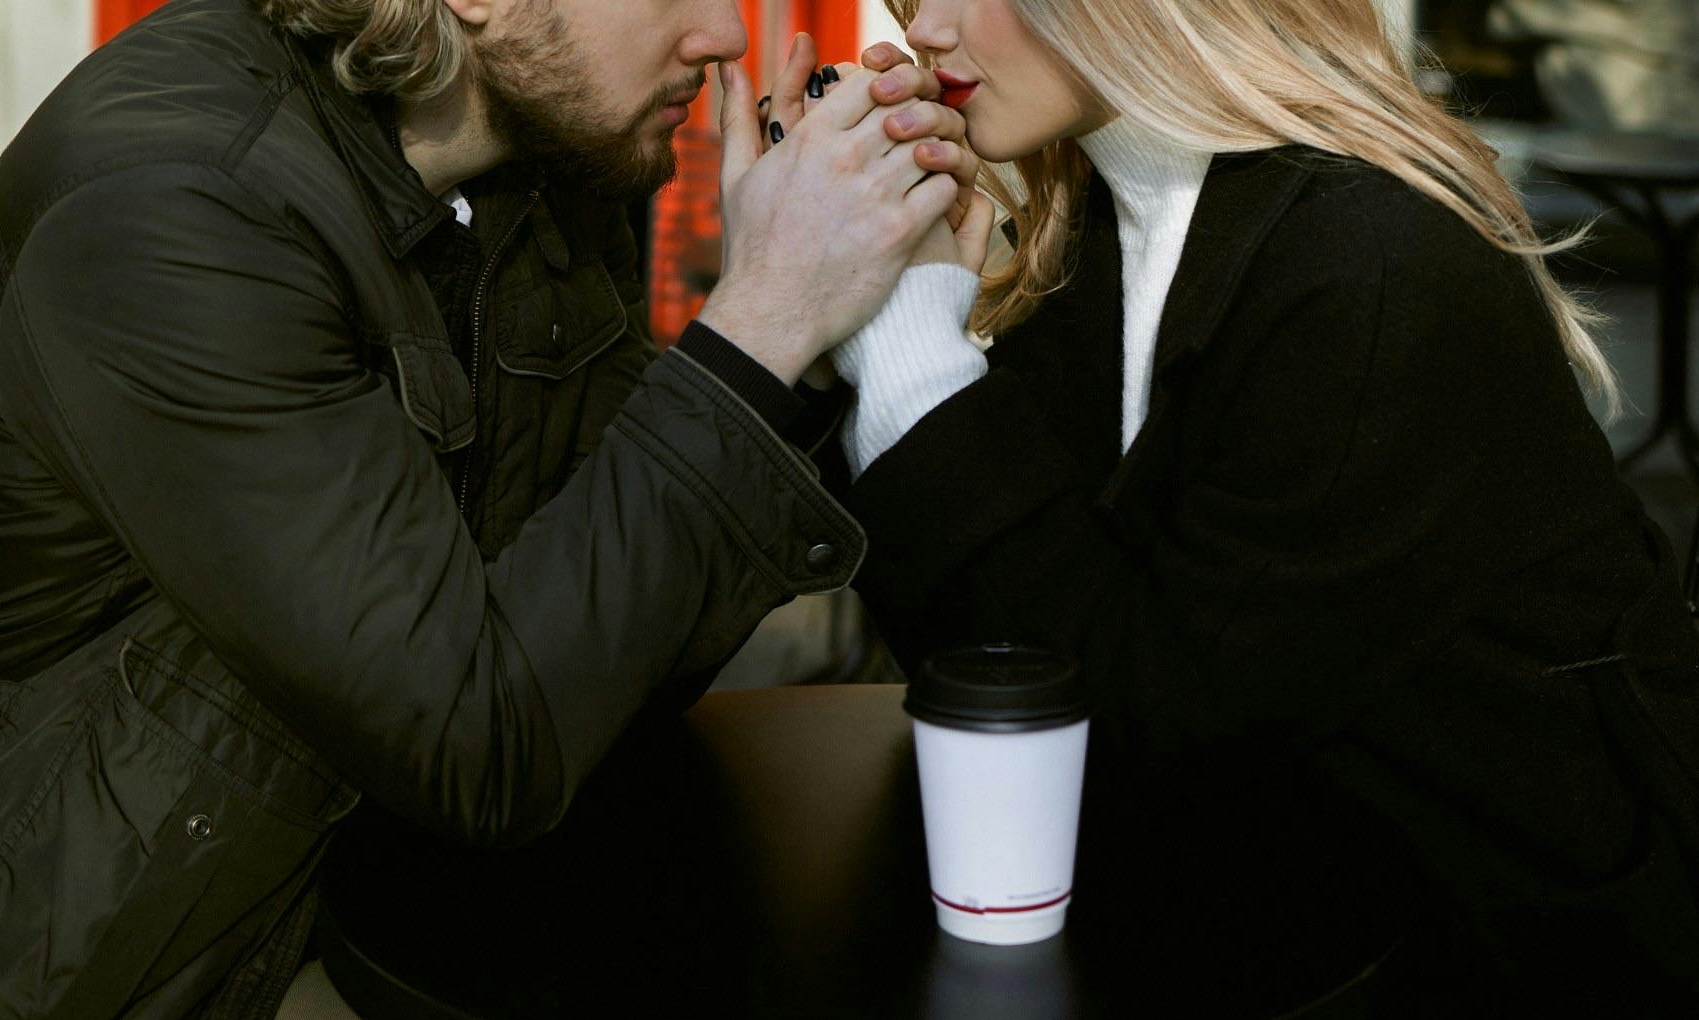 Sophia and Jason talking intently at a cozy café | Source: Pexels